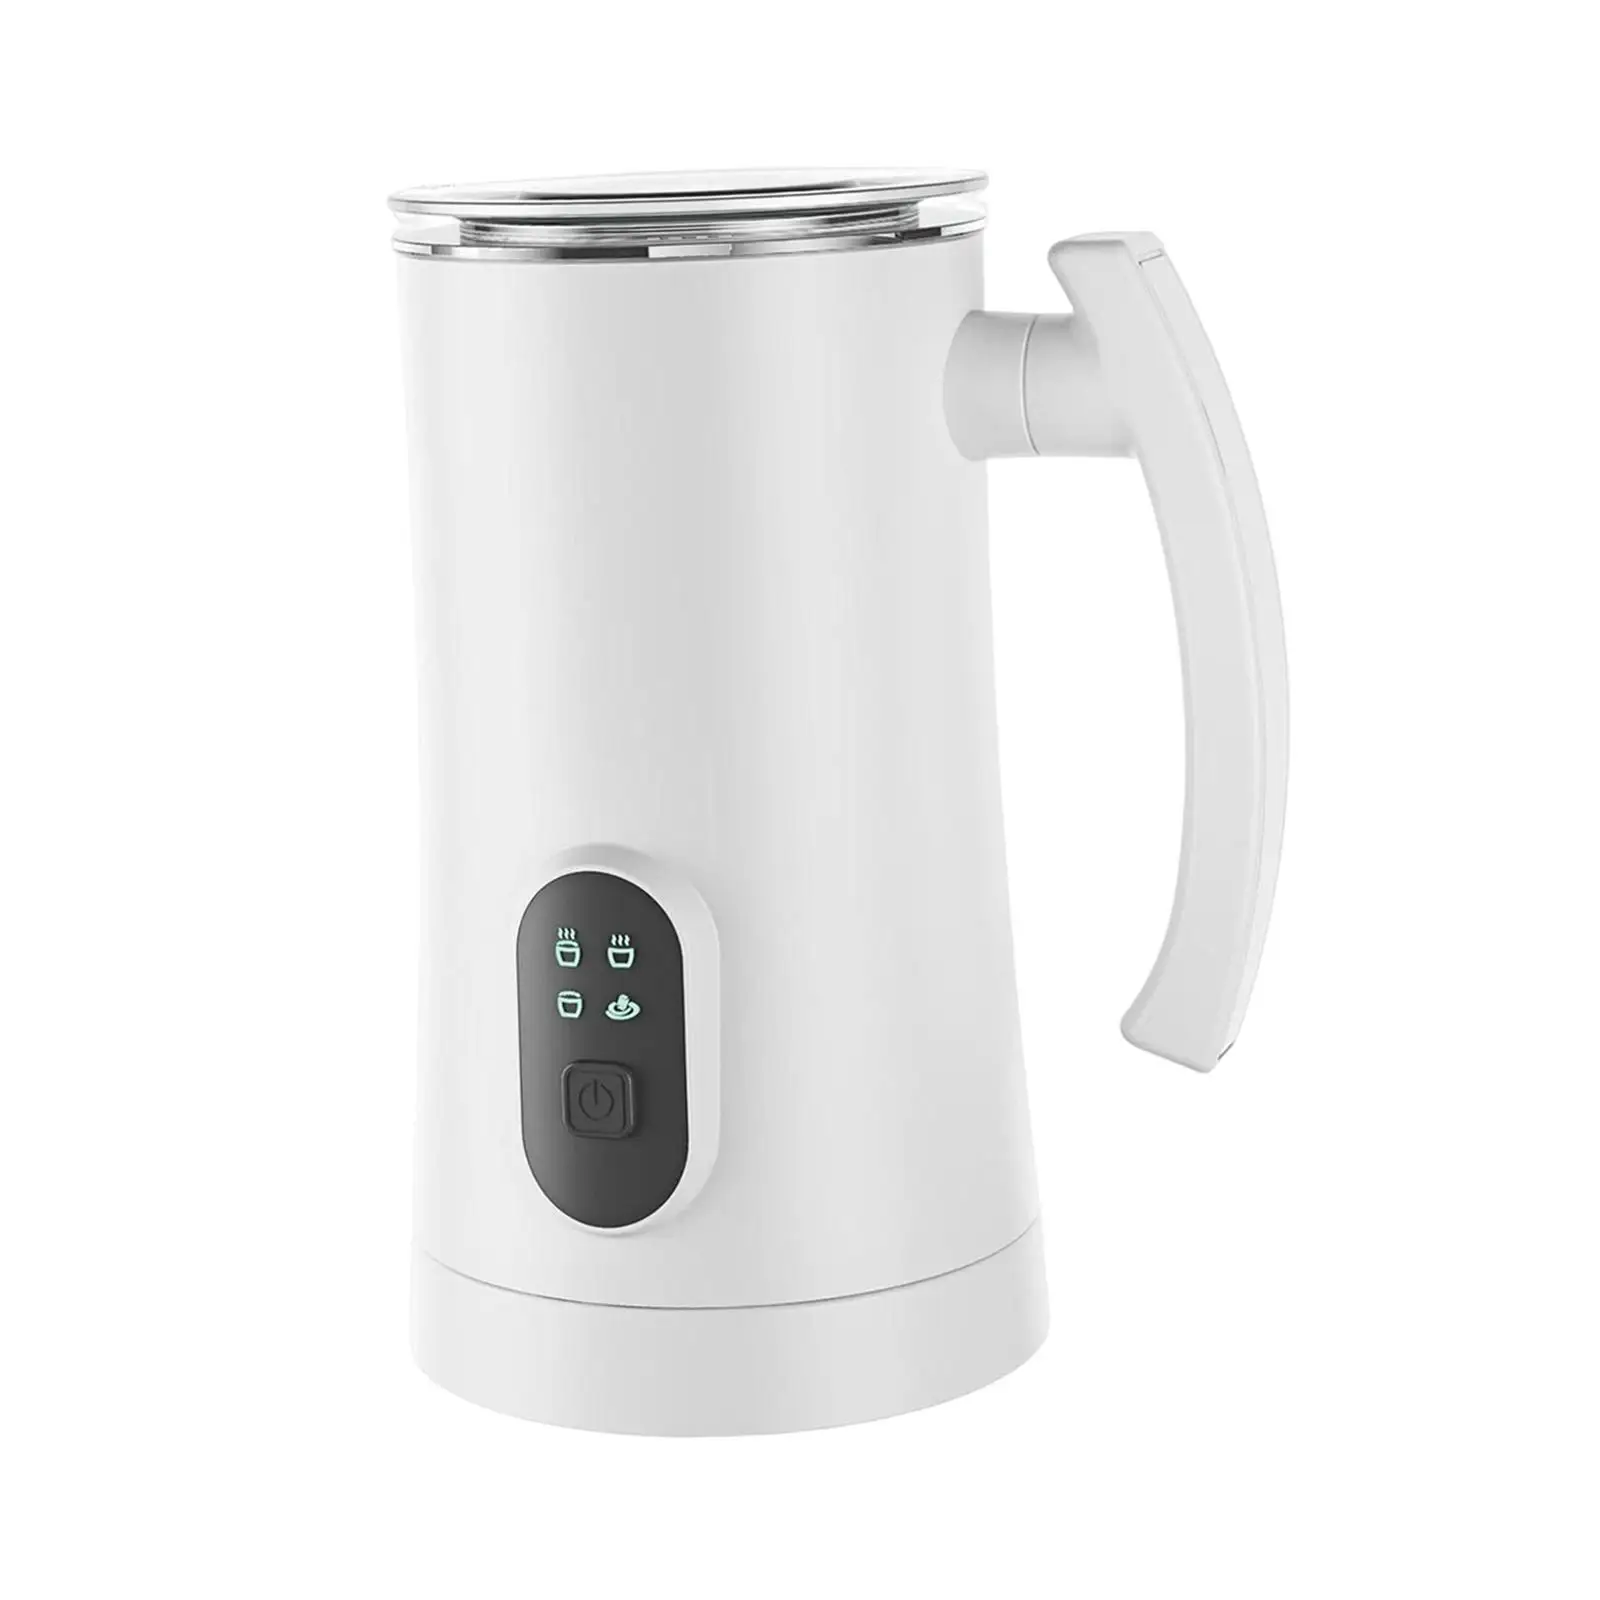 4 in 1 Electric Milk Steamer Portable Stainless Steel Hot and Cold Milk Frother Latte Foam Making Automatic Milk Warmer